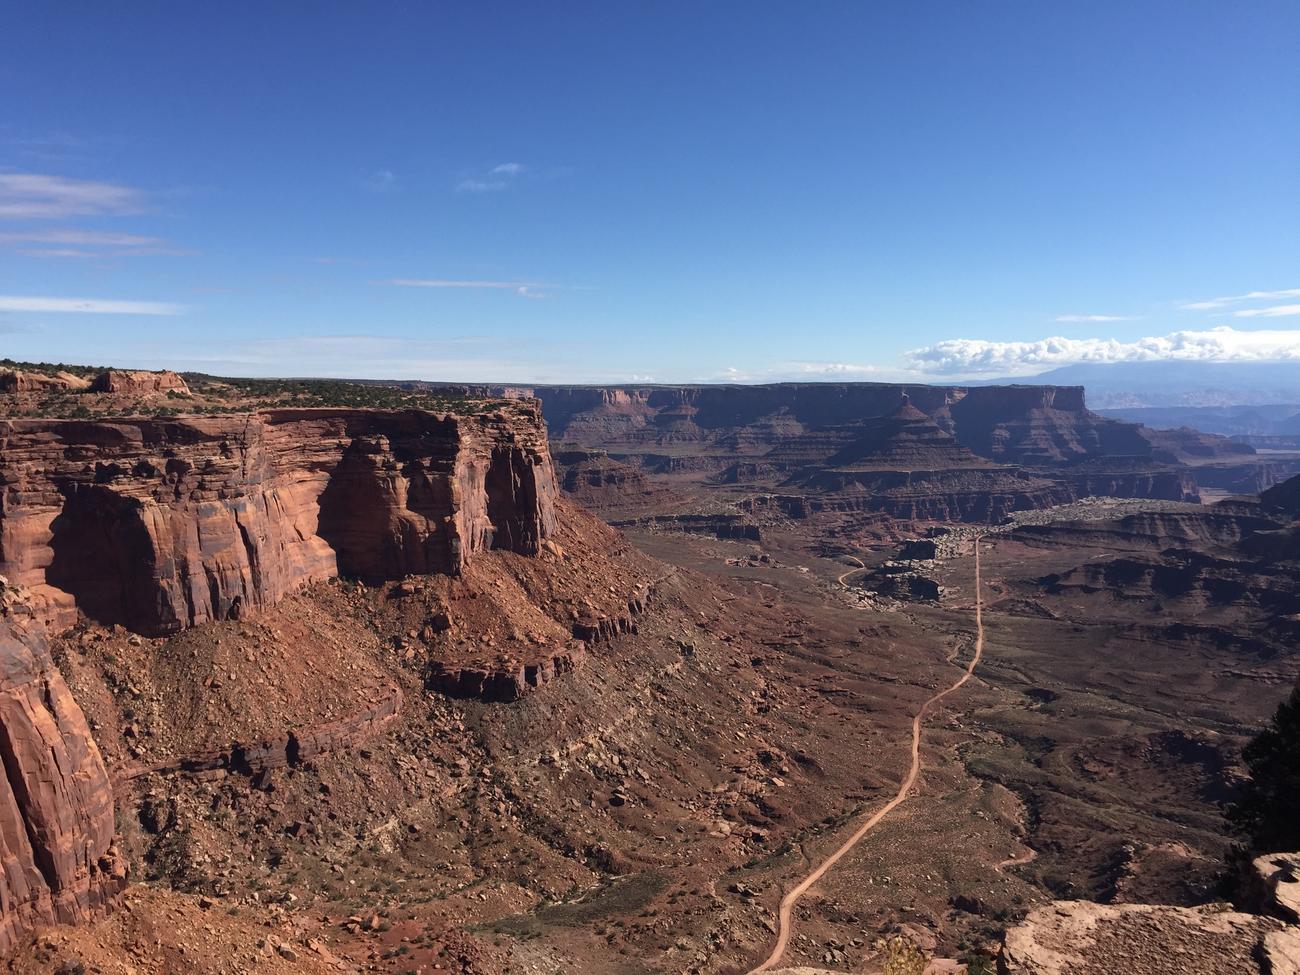 Fall Road Trip, Day 7: Canyonlands and T-Rex tracks